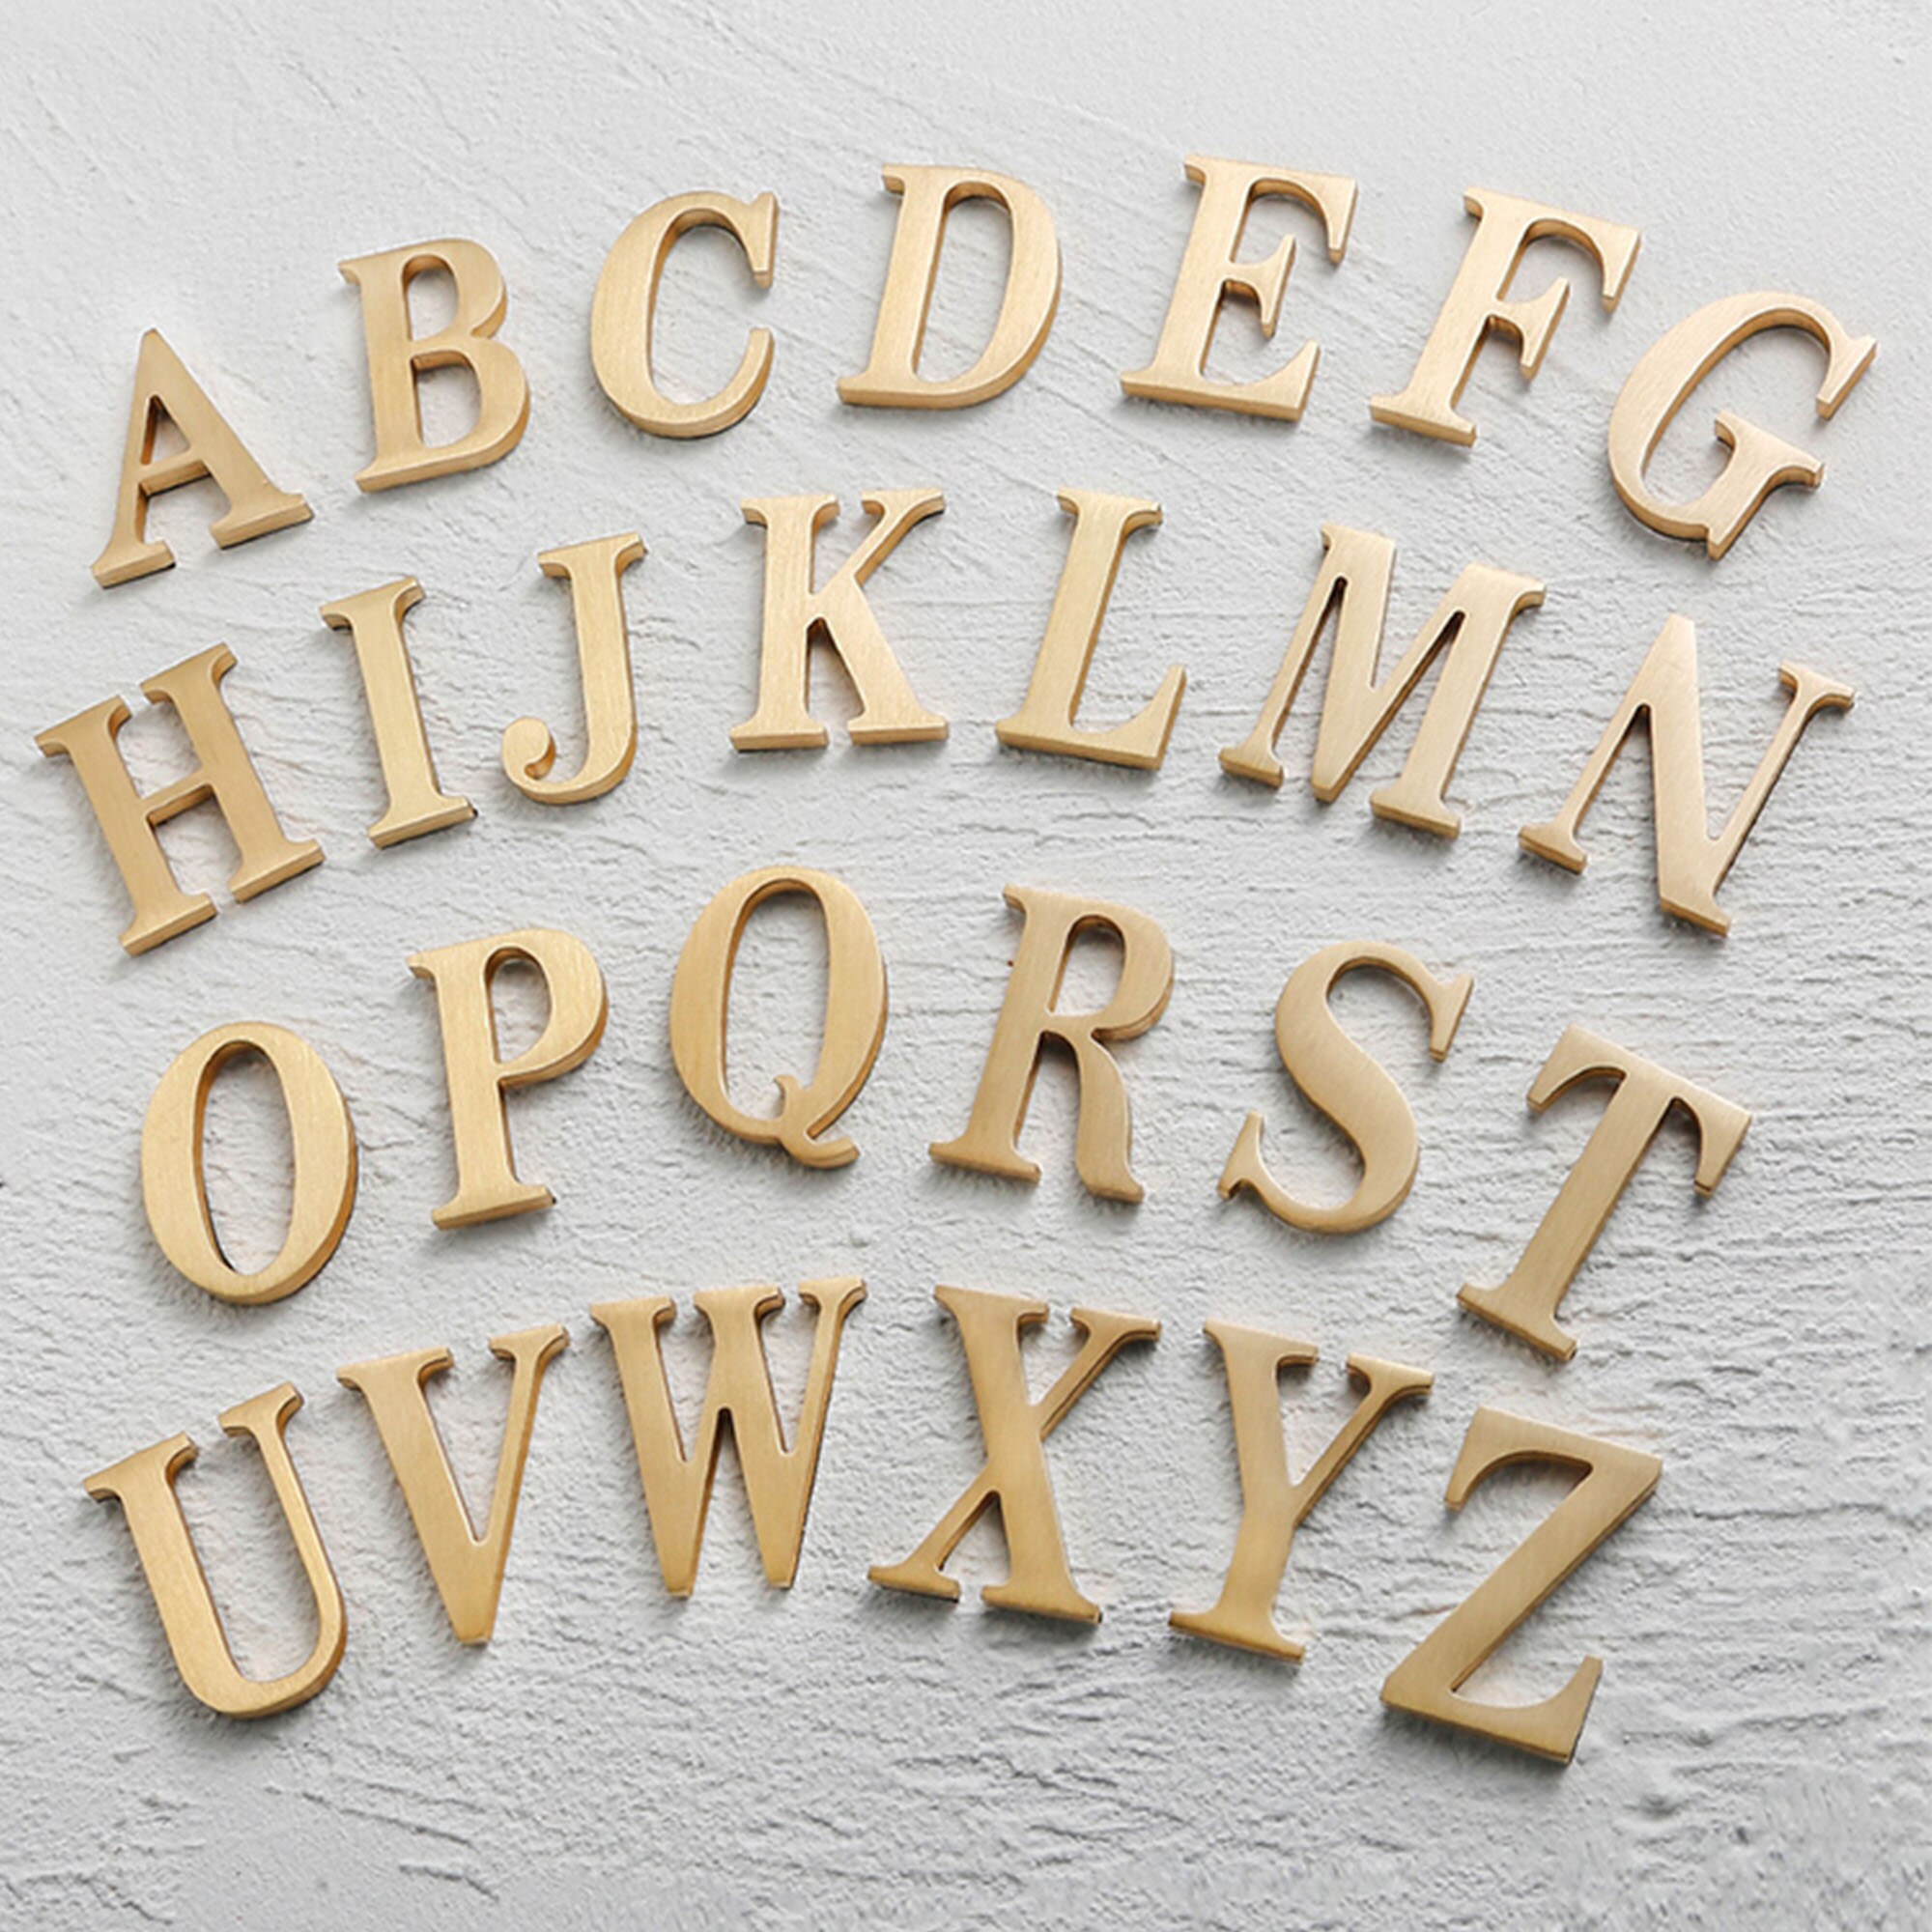 New 1.5-2" Solid Brass Adhesive Numbers and Letters for House Signs 